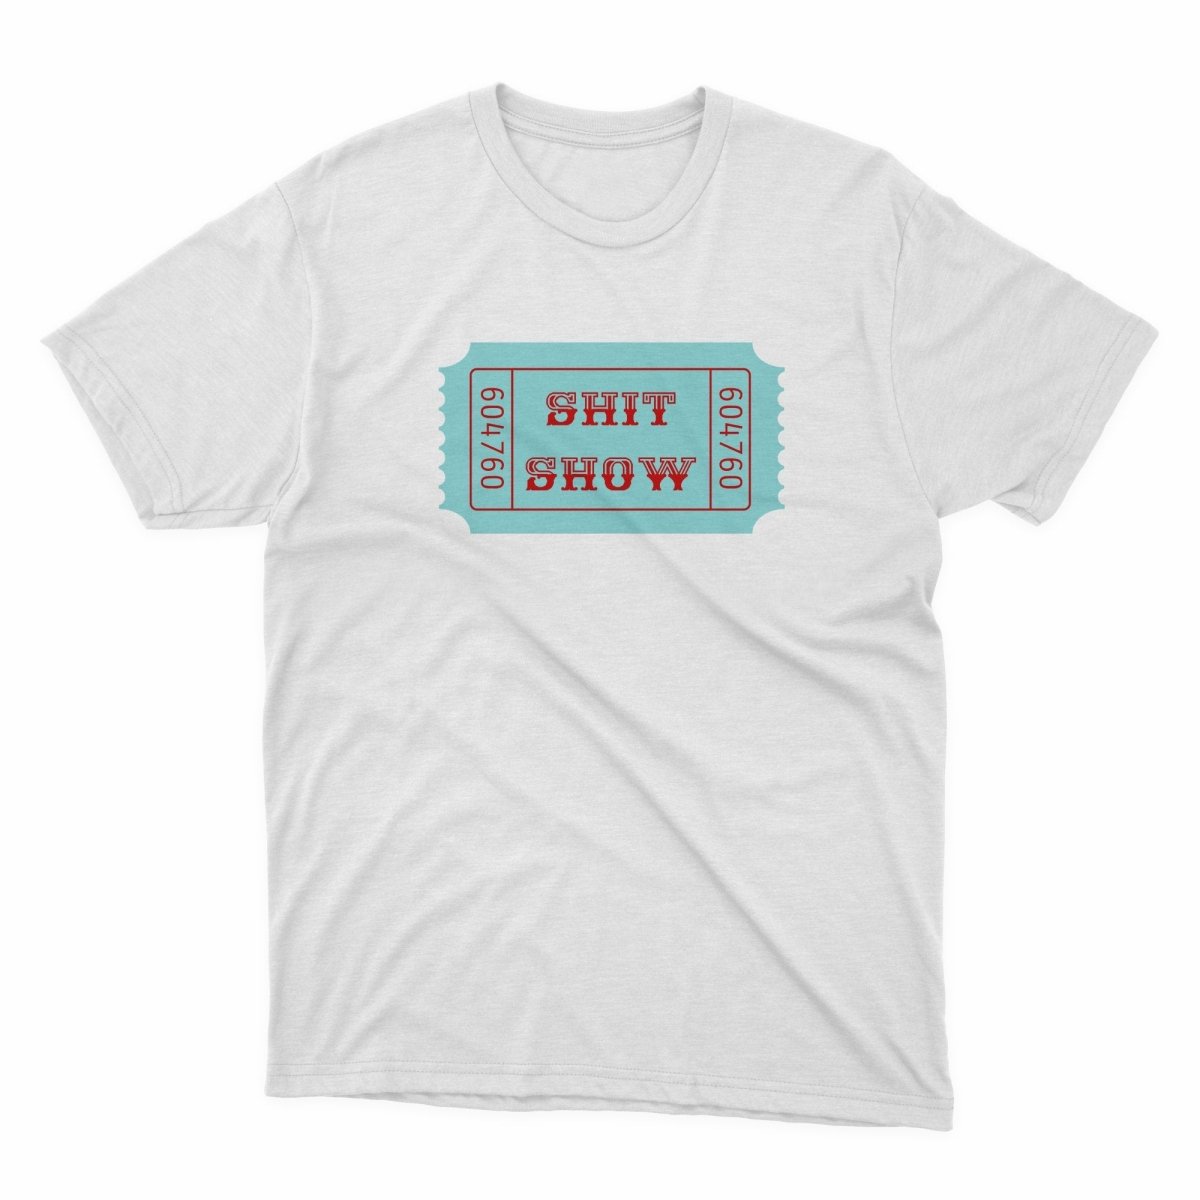 Ticket To The Shit Show Shirt - stickerbullTicket To The Shit Show ShirtShirtsPrintifystickerbull24951722158263221731WhiteSa white t - shirt with the words this show on it